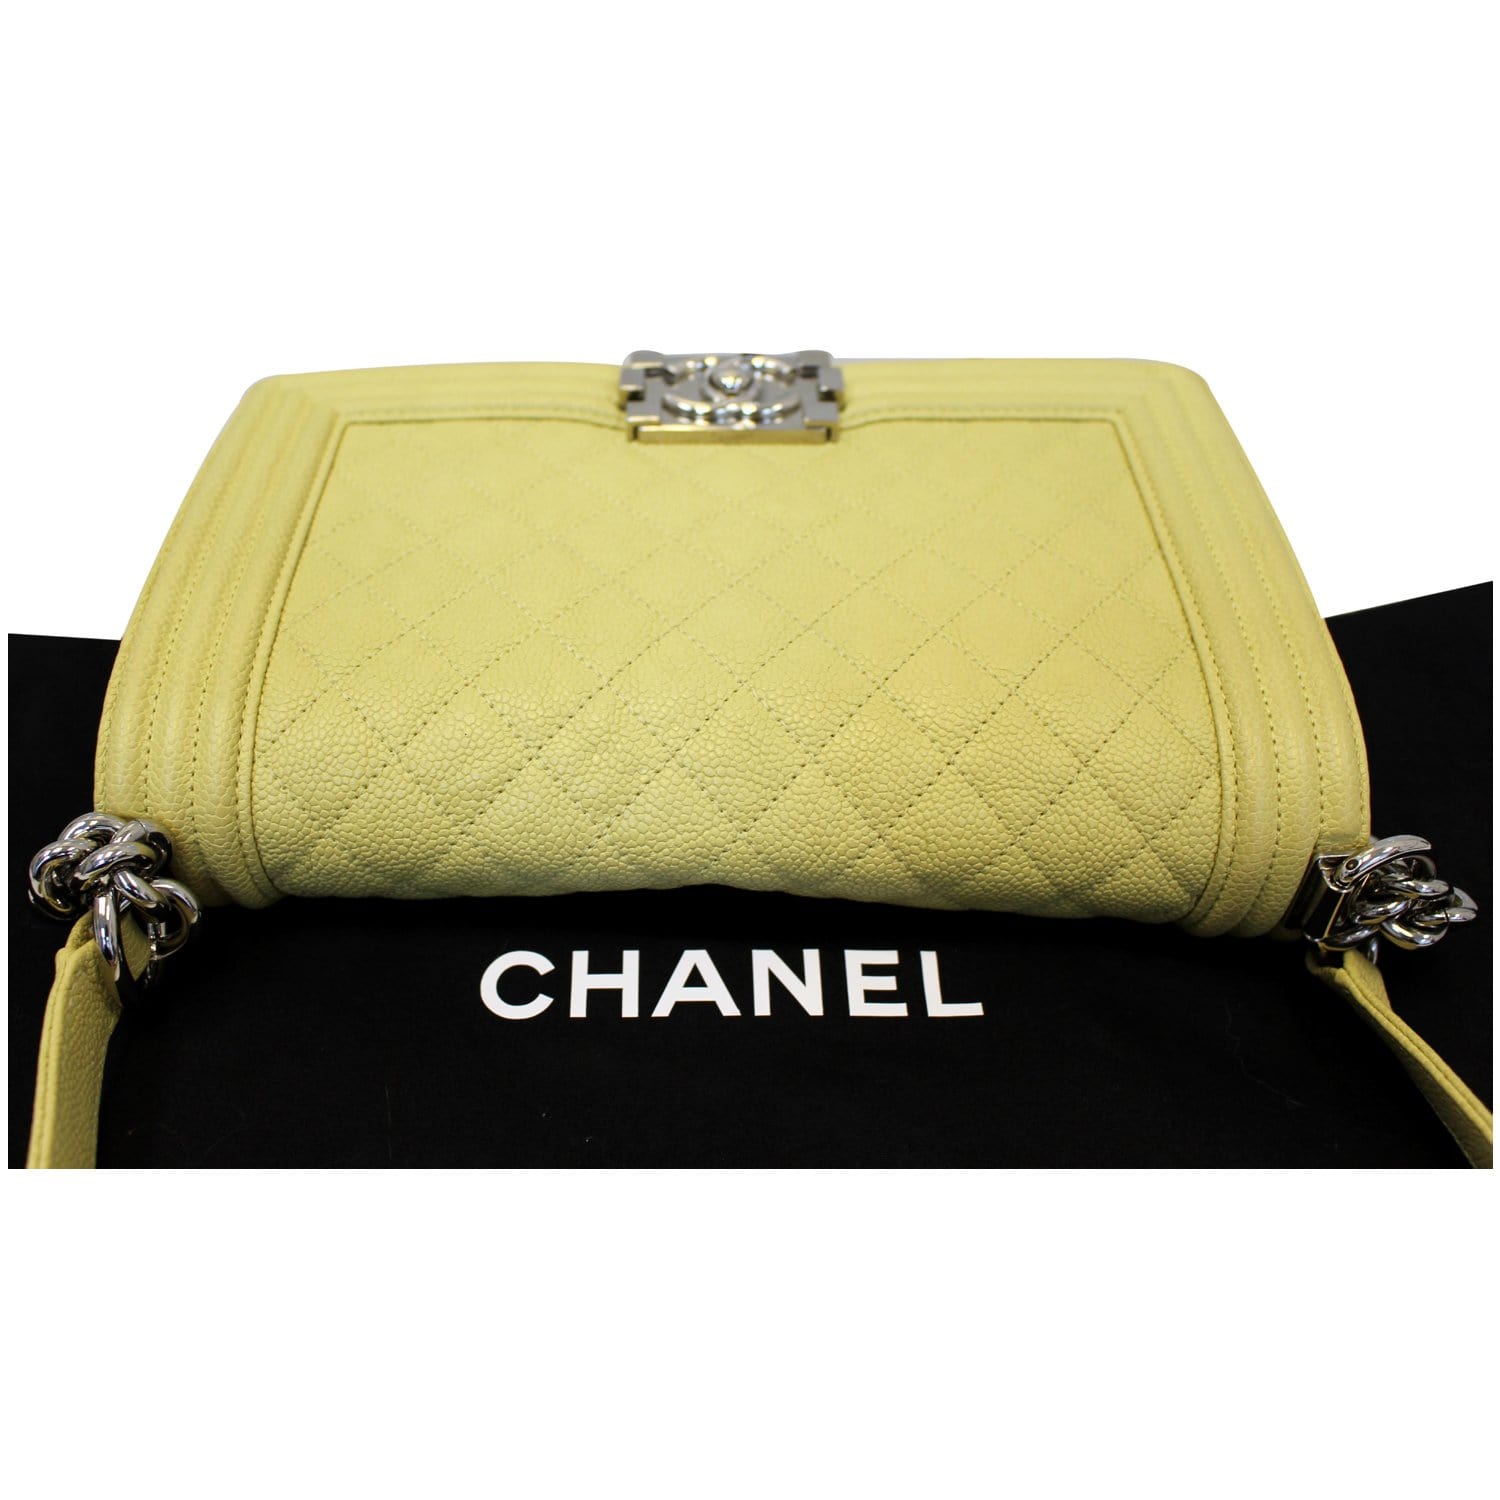 CHANEL 22 Small Chain Shoulder Bag Caviar Skin Leather Yellow AS3260  90194957